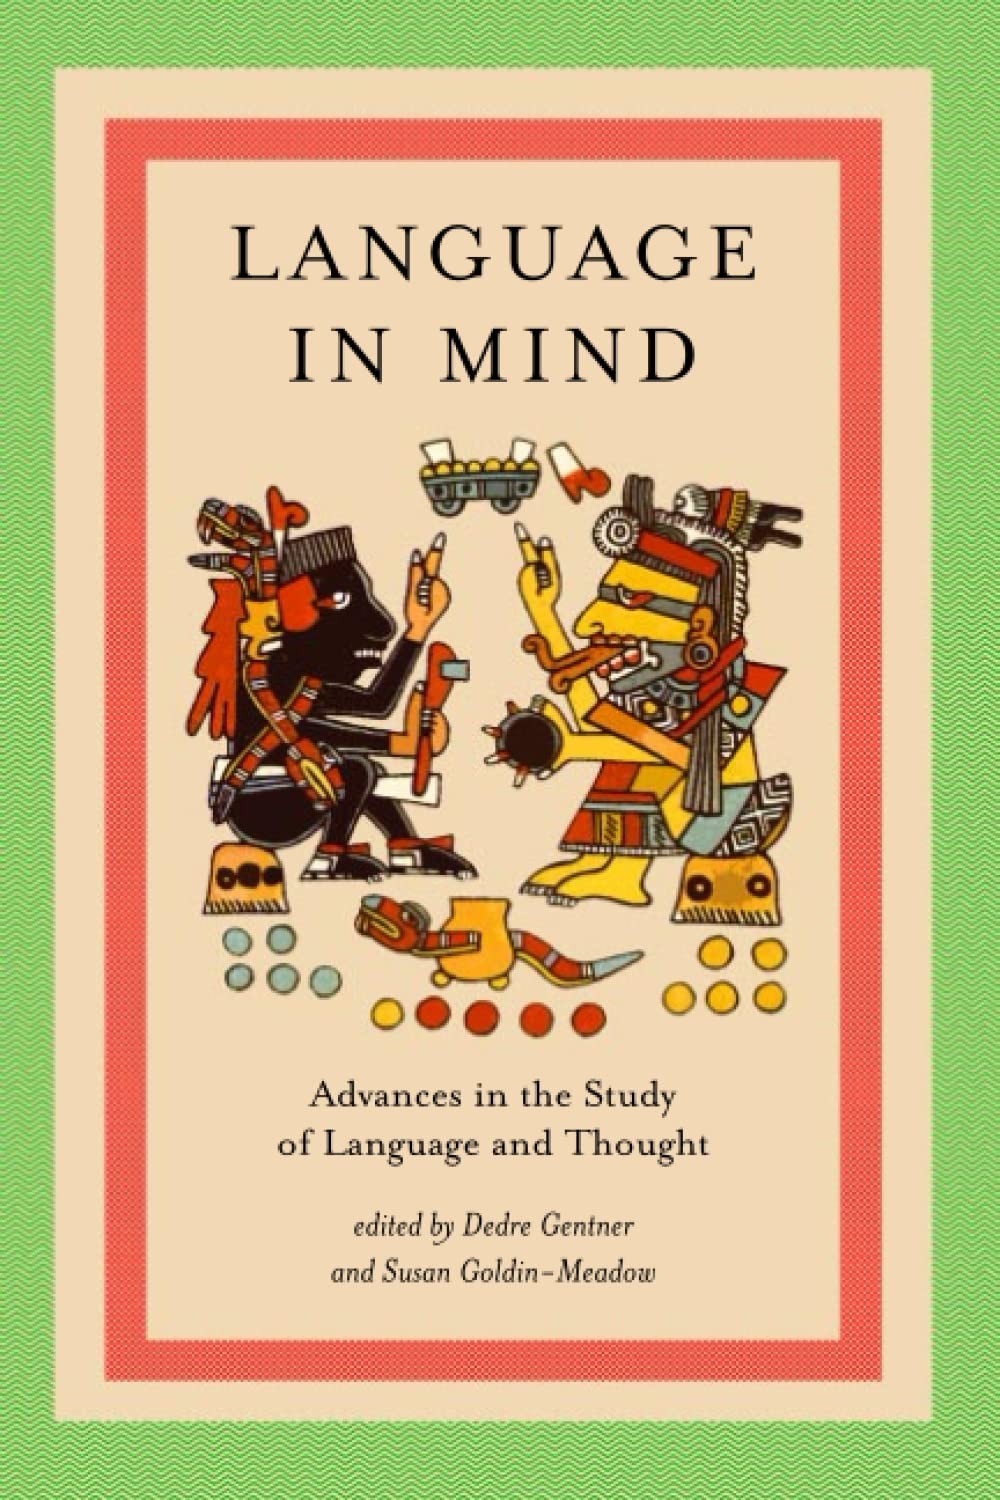 Language in Mind: Advances in the Study of Language and Thought